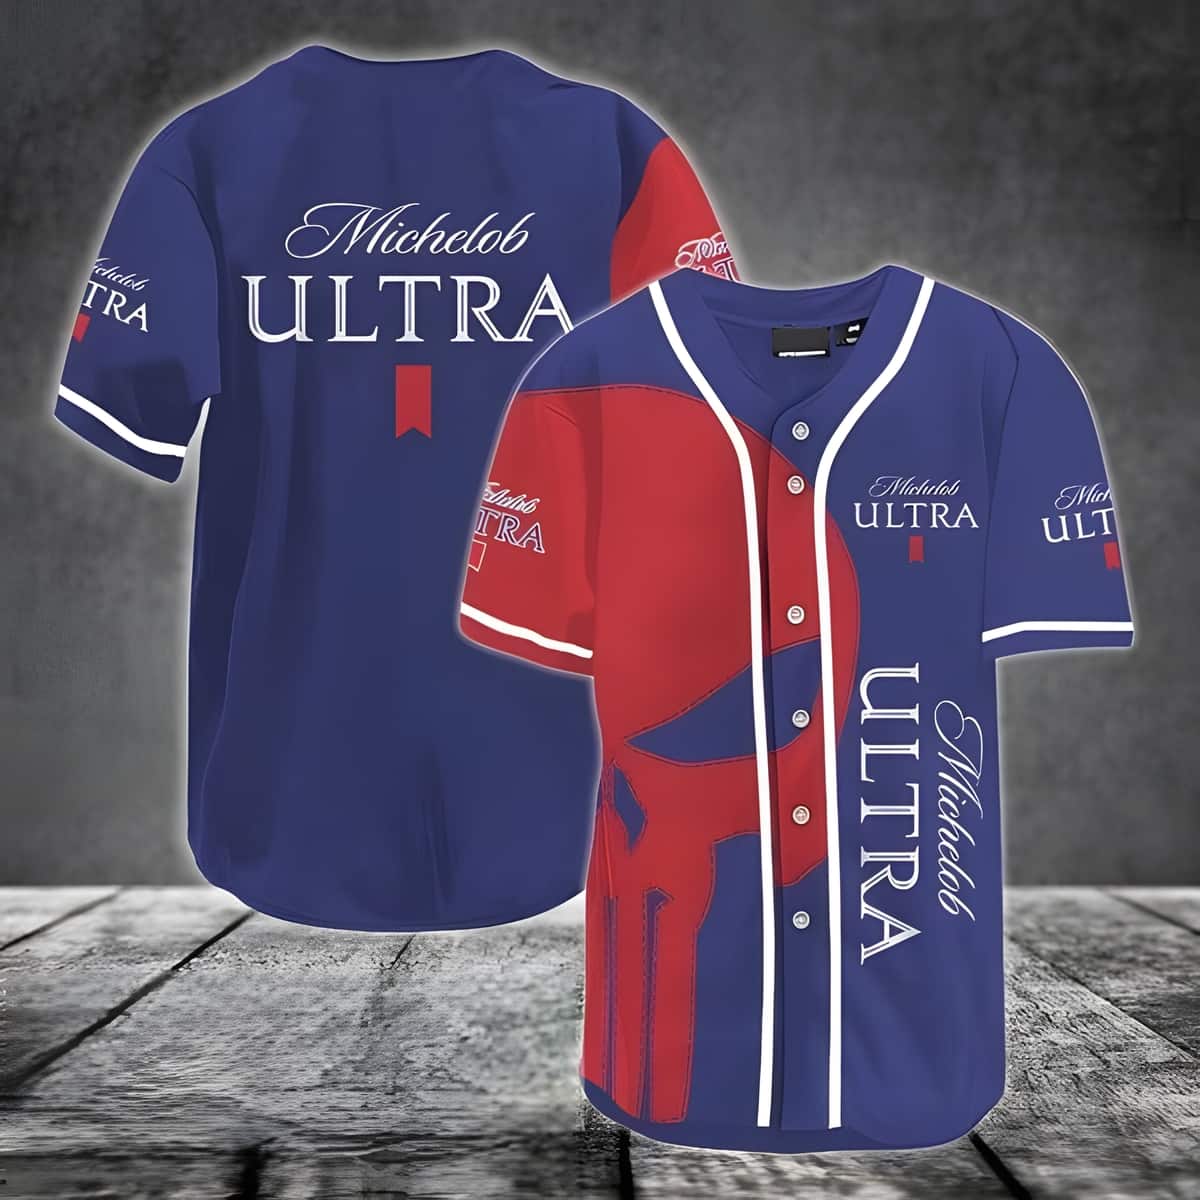 Michelob ULTRA Baseball Jersey Red Skull With Dark Blue Theme Unique Gift For Beer Lovers